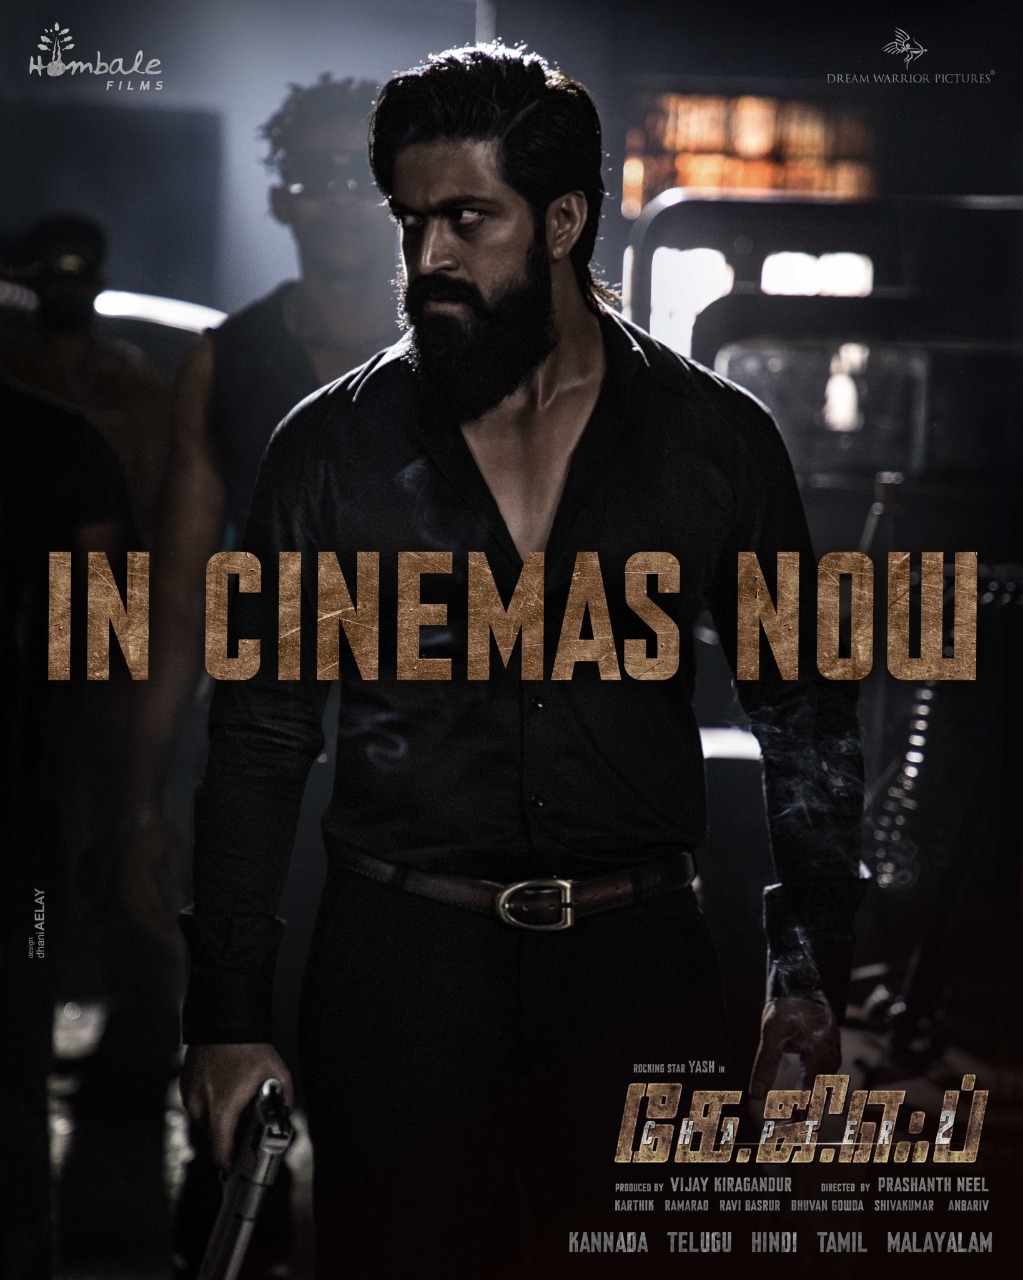 KGF CHAPTER 2 INDIA BOX OFFICE GROSS COLLECTIONS DAY 1